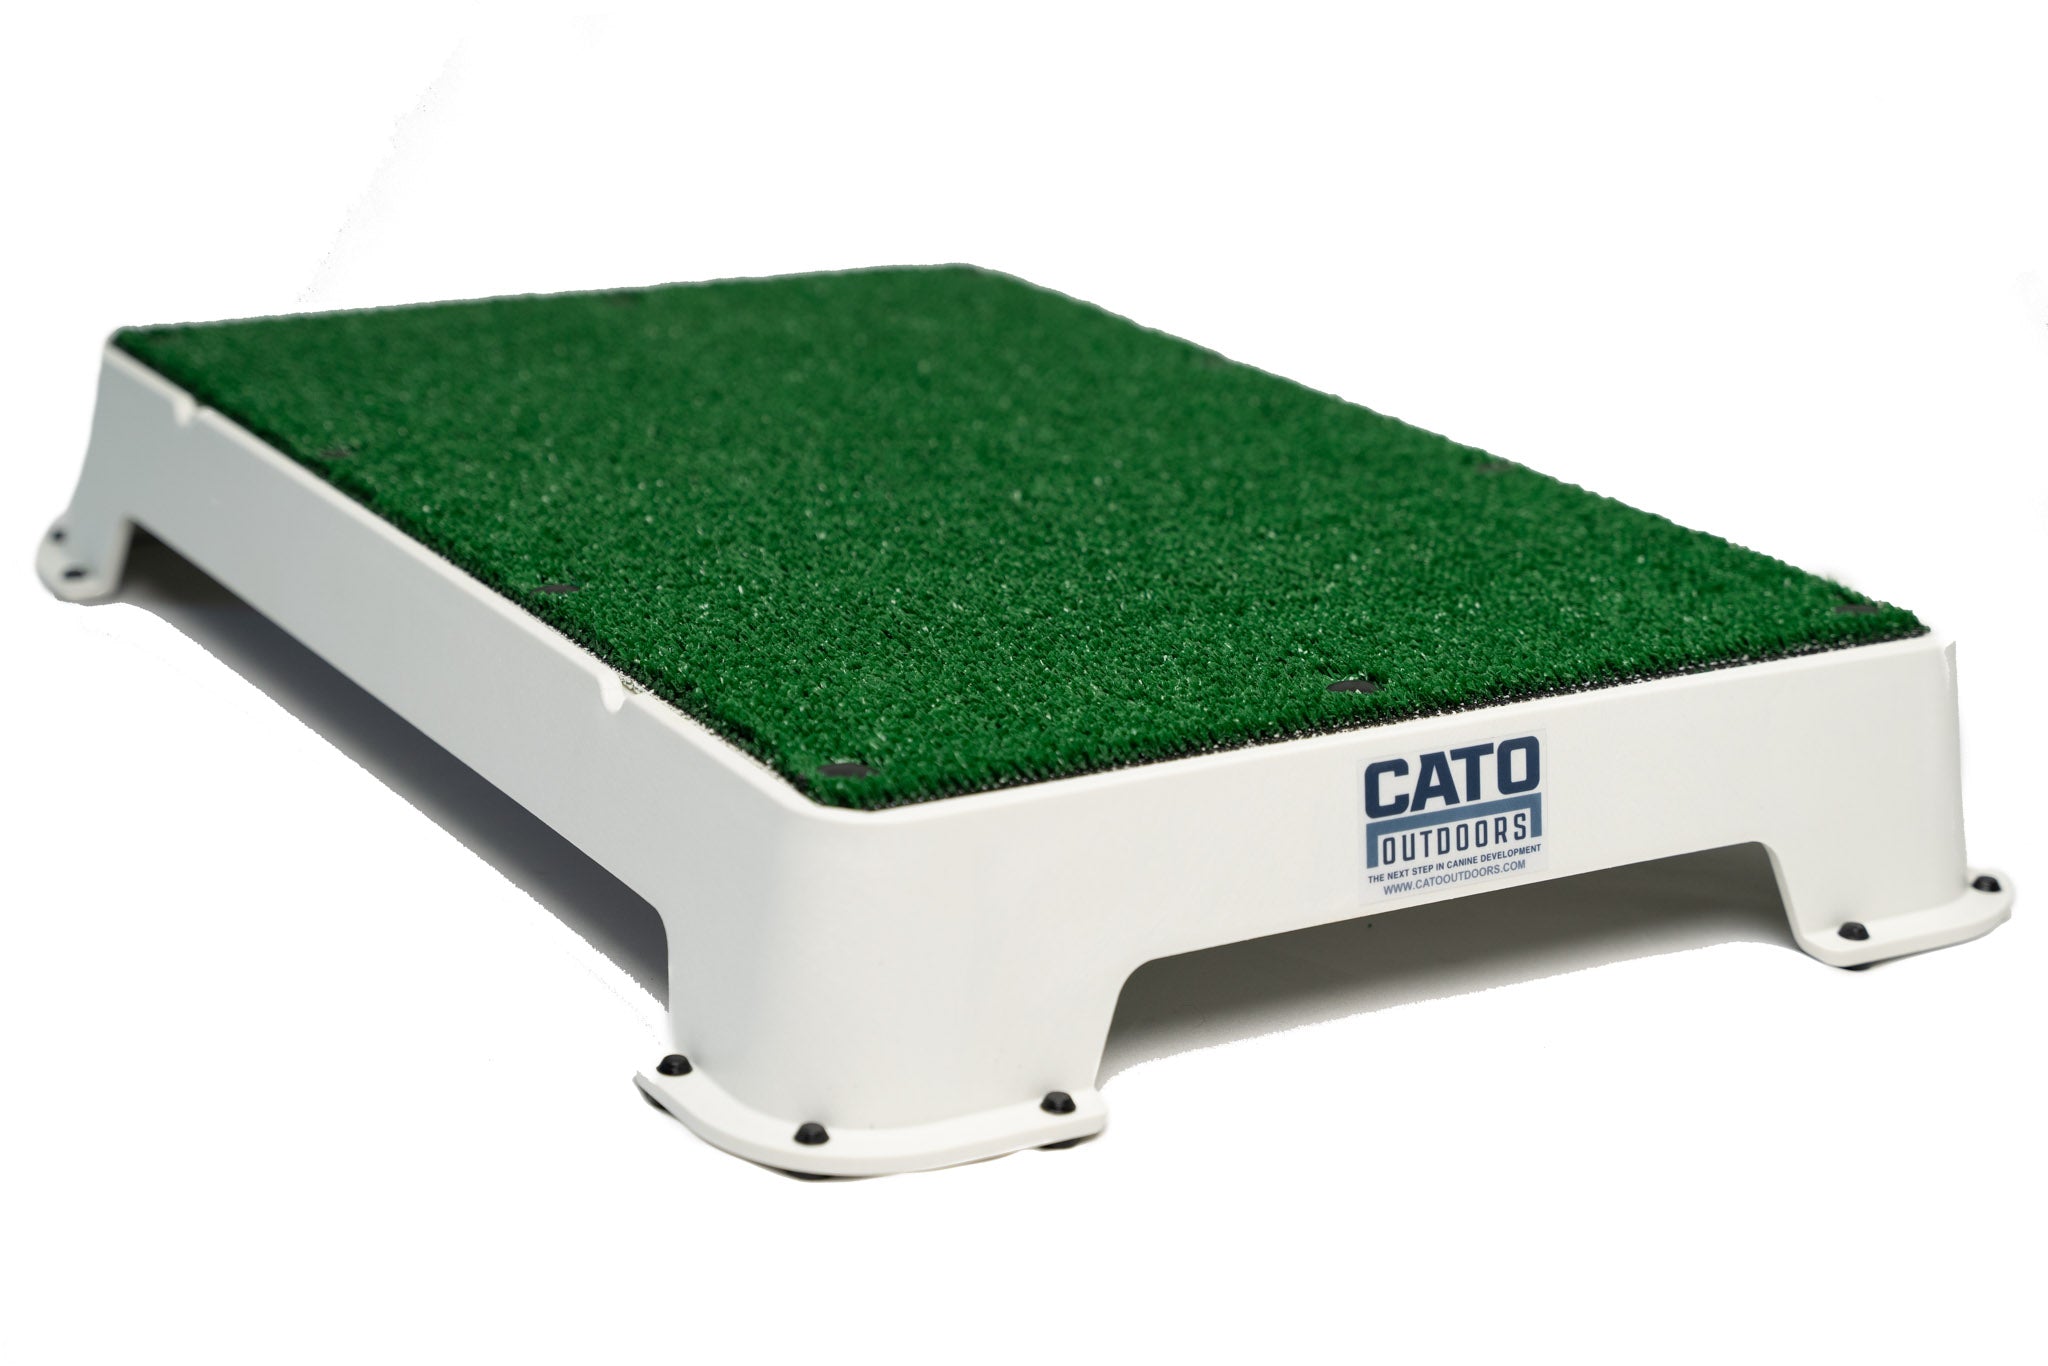 Cato Outdoors Placement Board